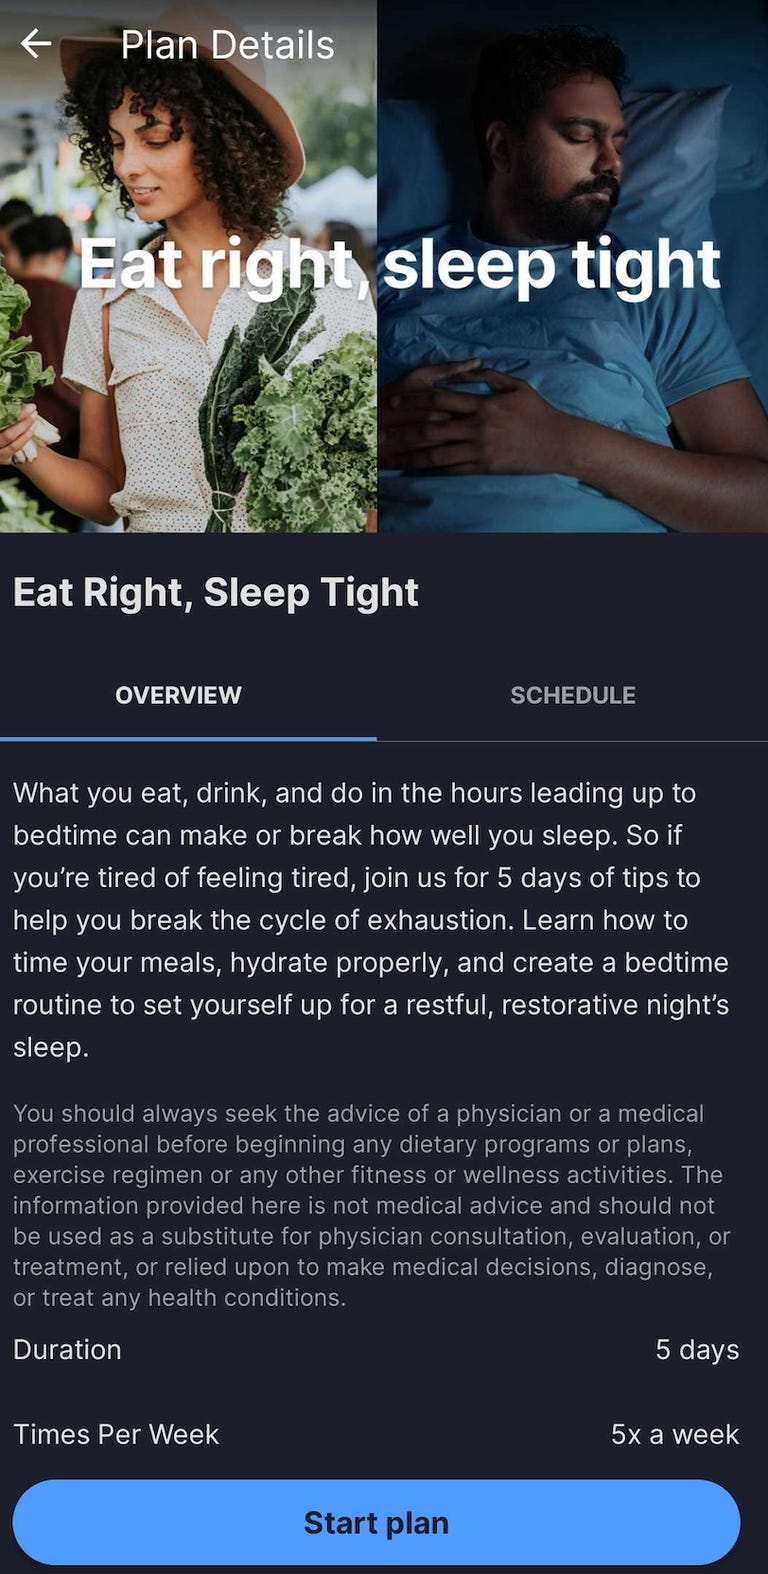 The Eat Right, Sleep Tight Plan details from MyFitnessPal